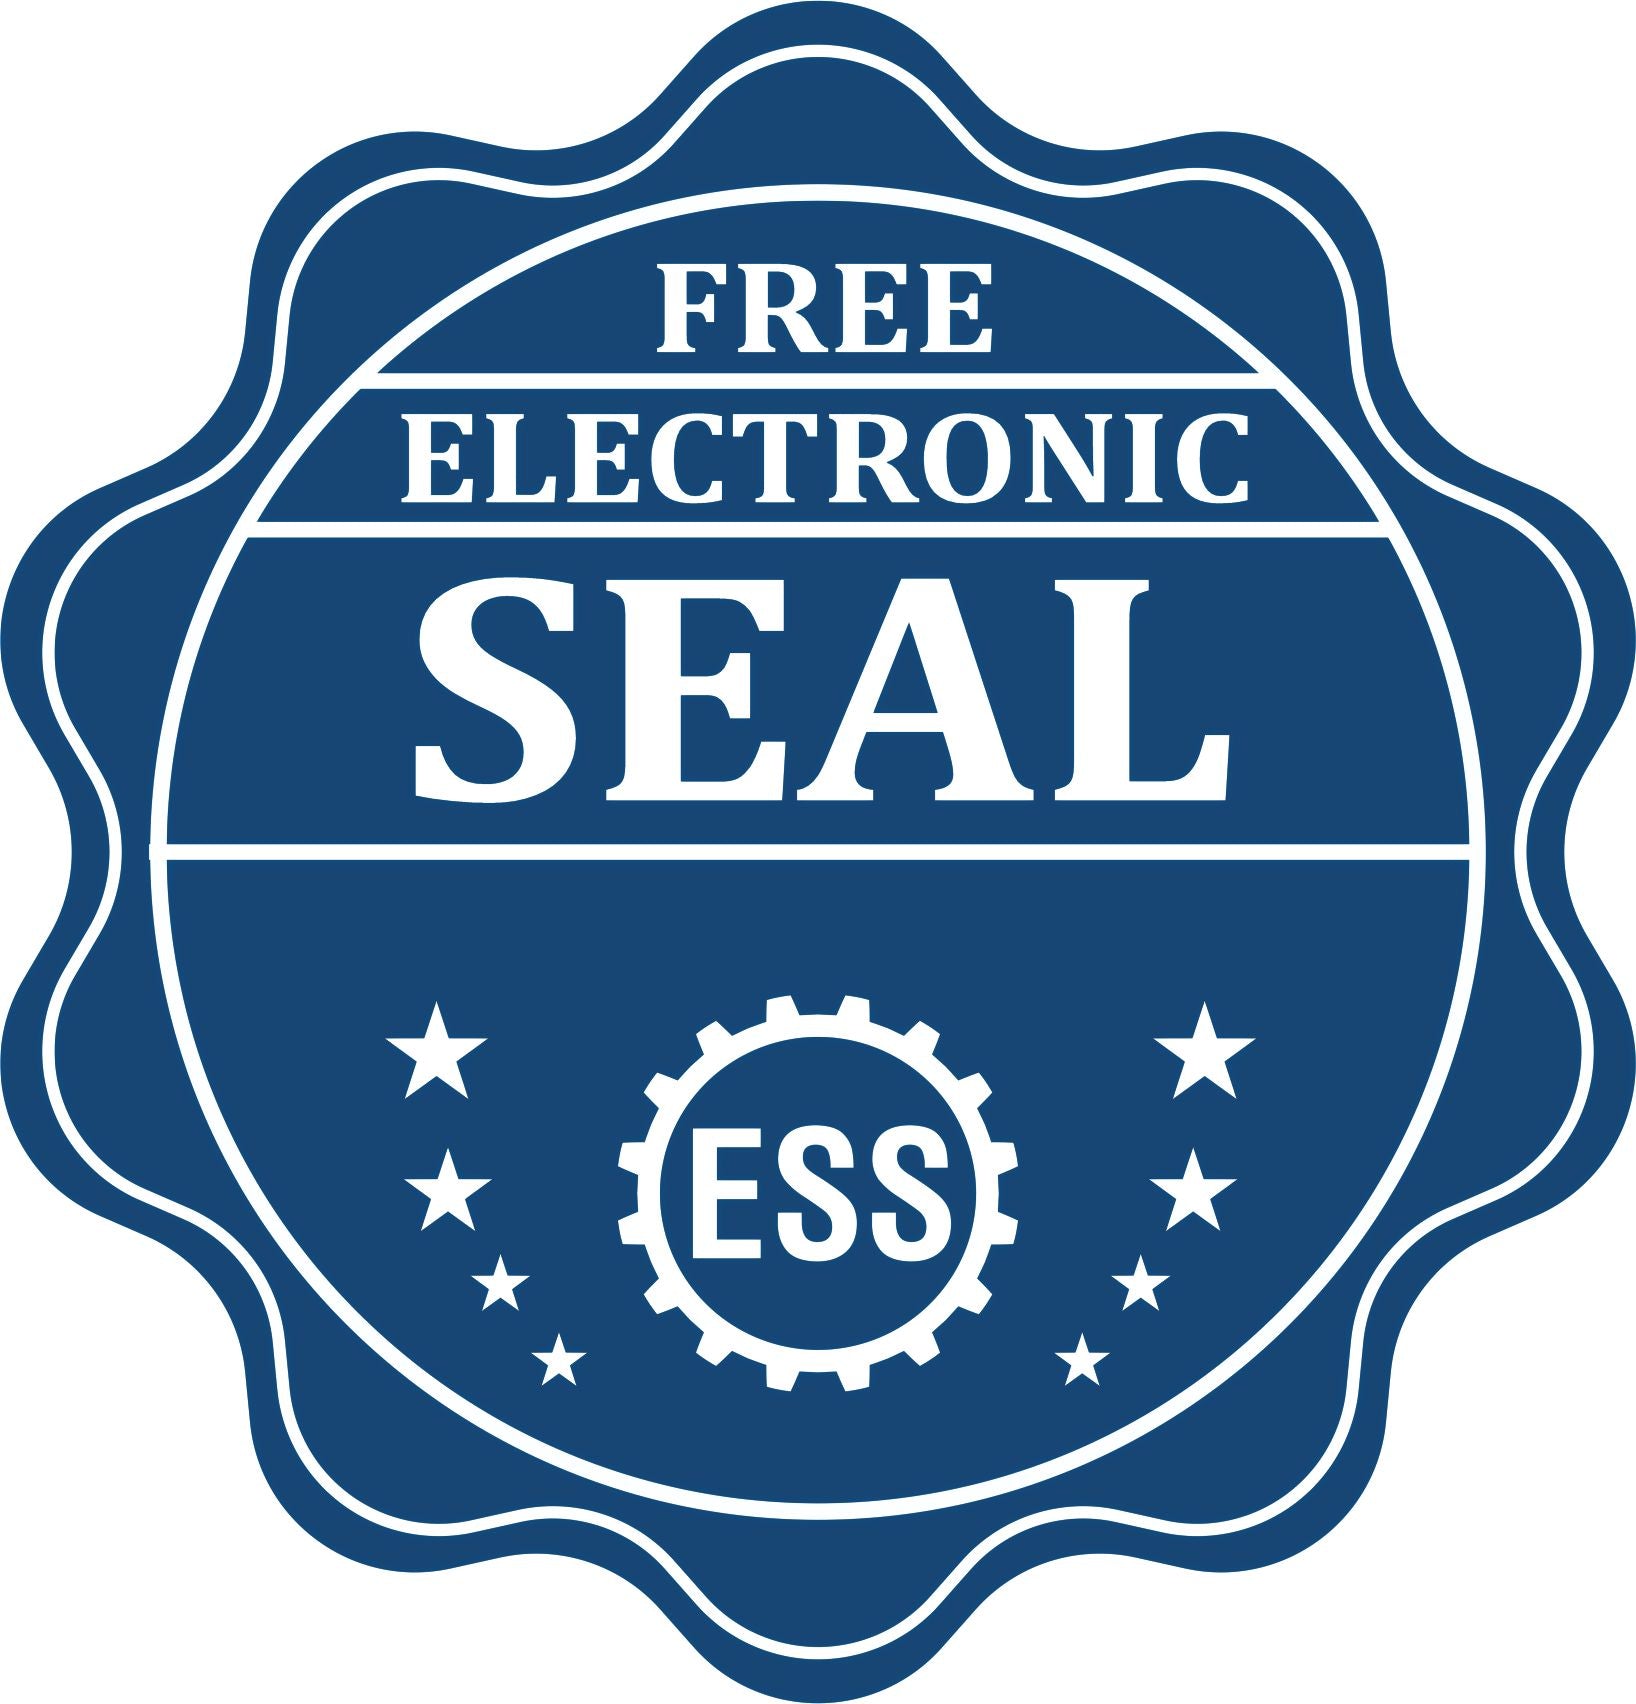 A badge showing a free electronic seal for the Gift West Virginia Geologist Seal with stars and the ESS gear on the emblem.